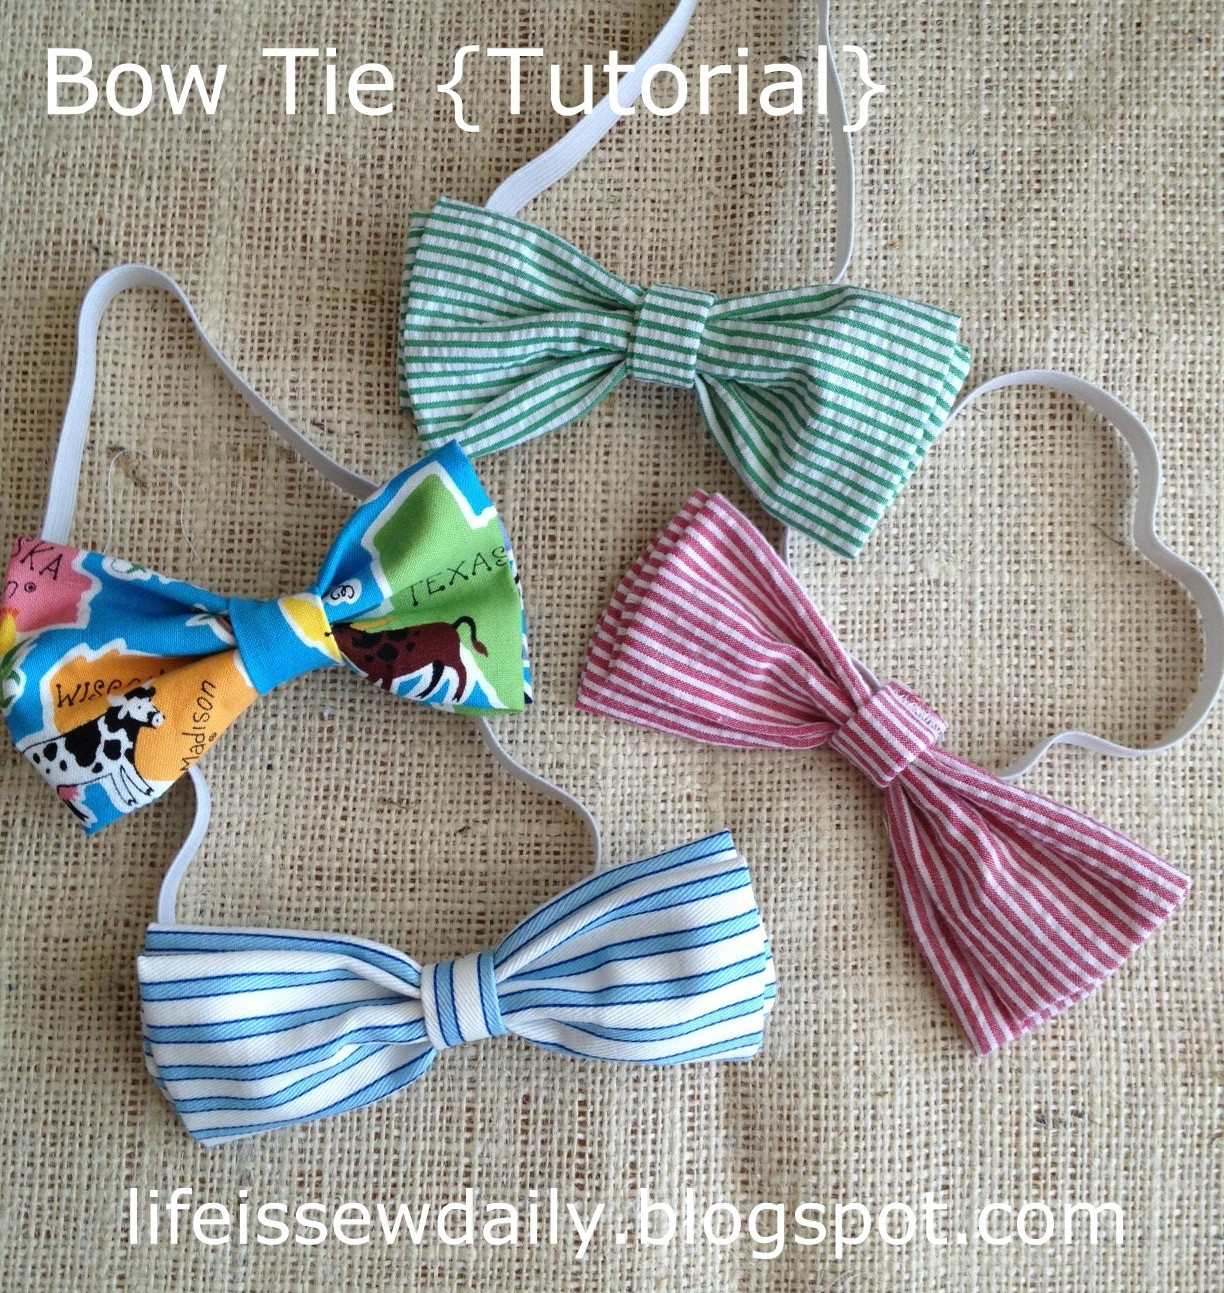 DIY Baby Bow Ties
 Life is Sew Daily Bow Ties for Baby & Toddler Tutorial